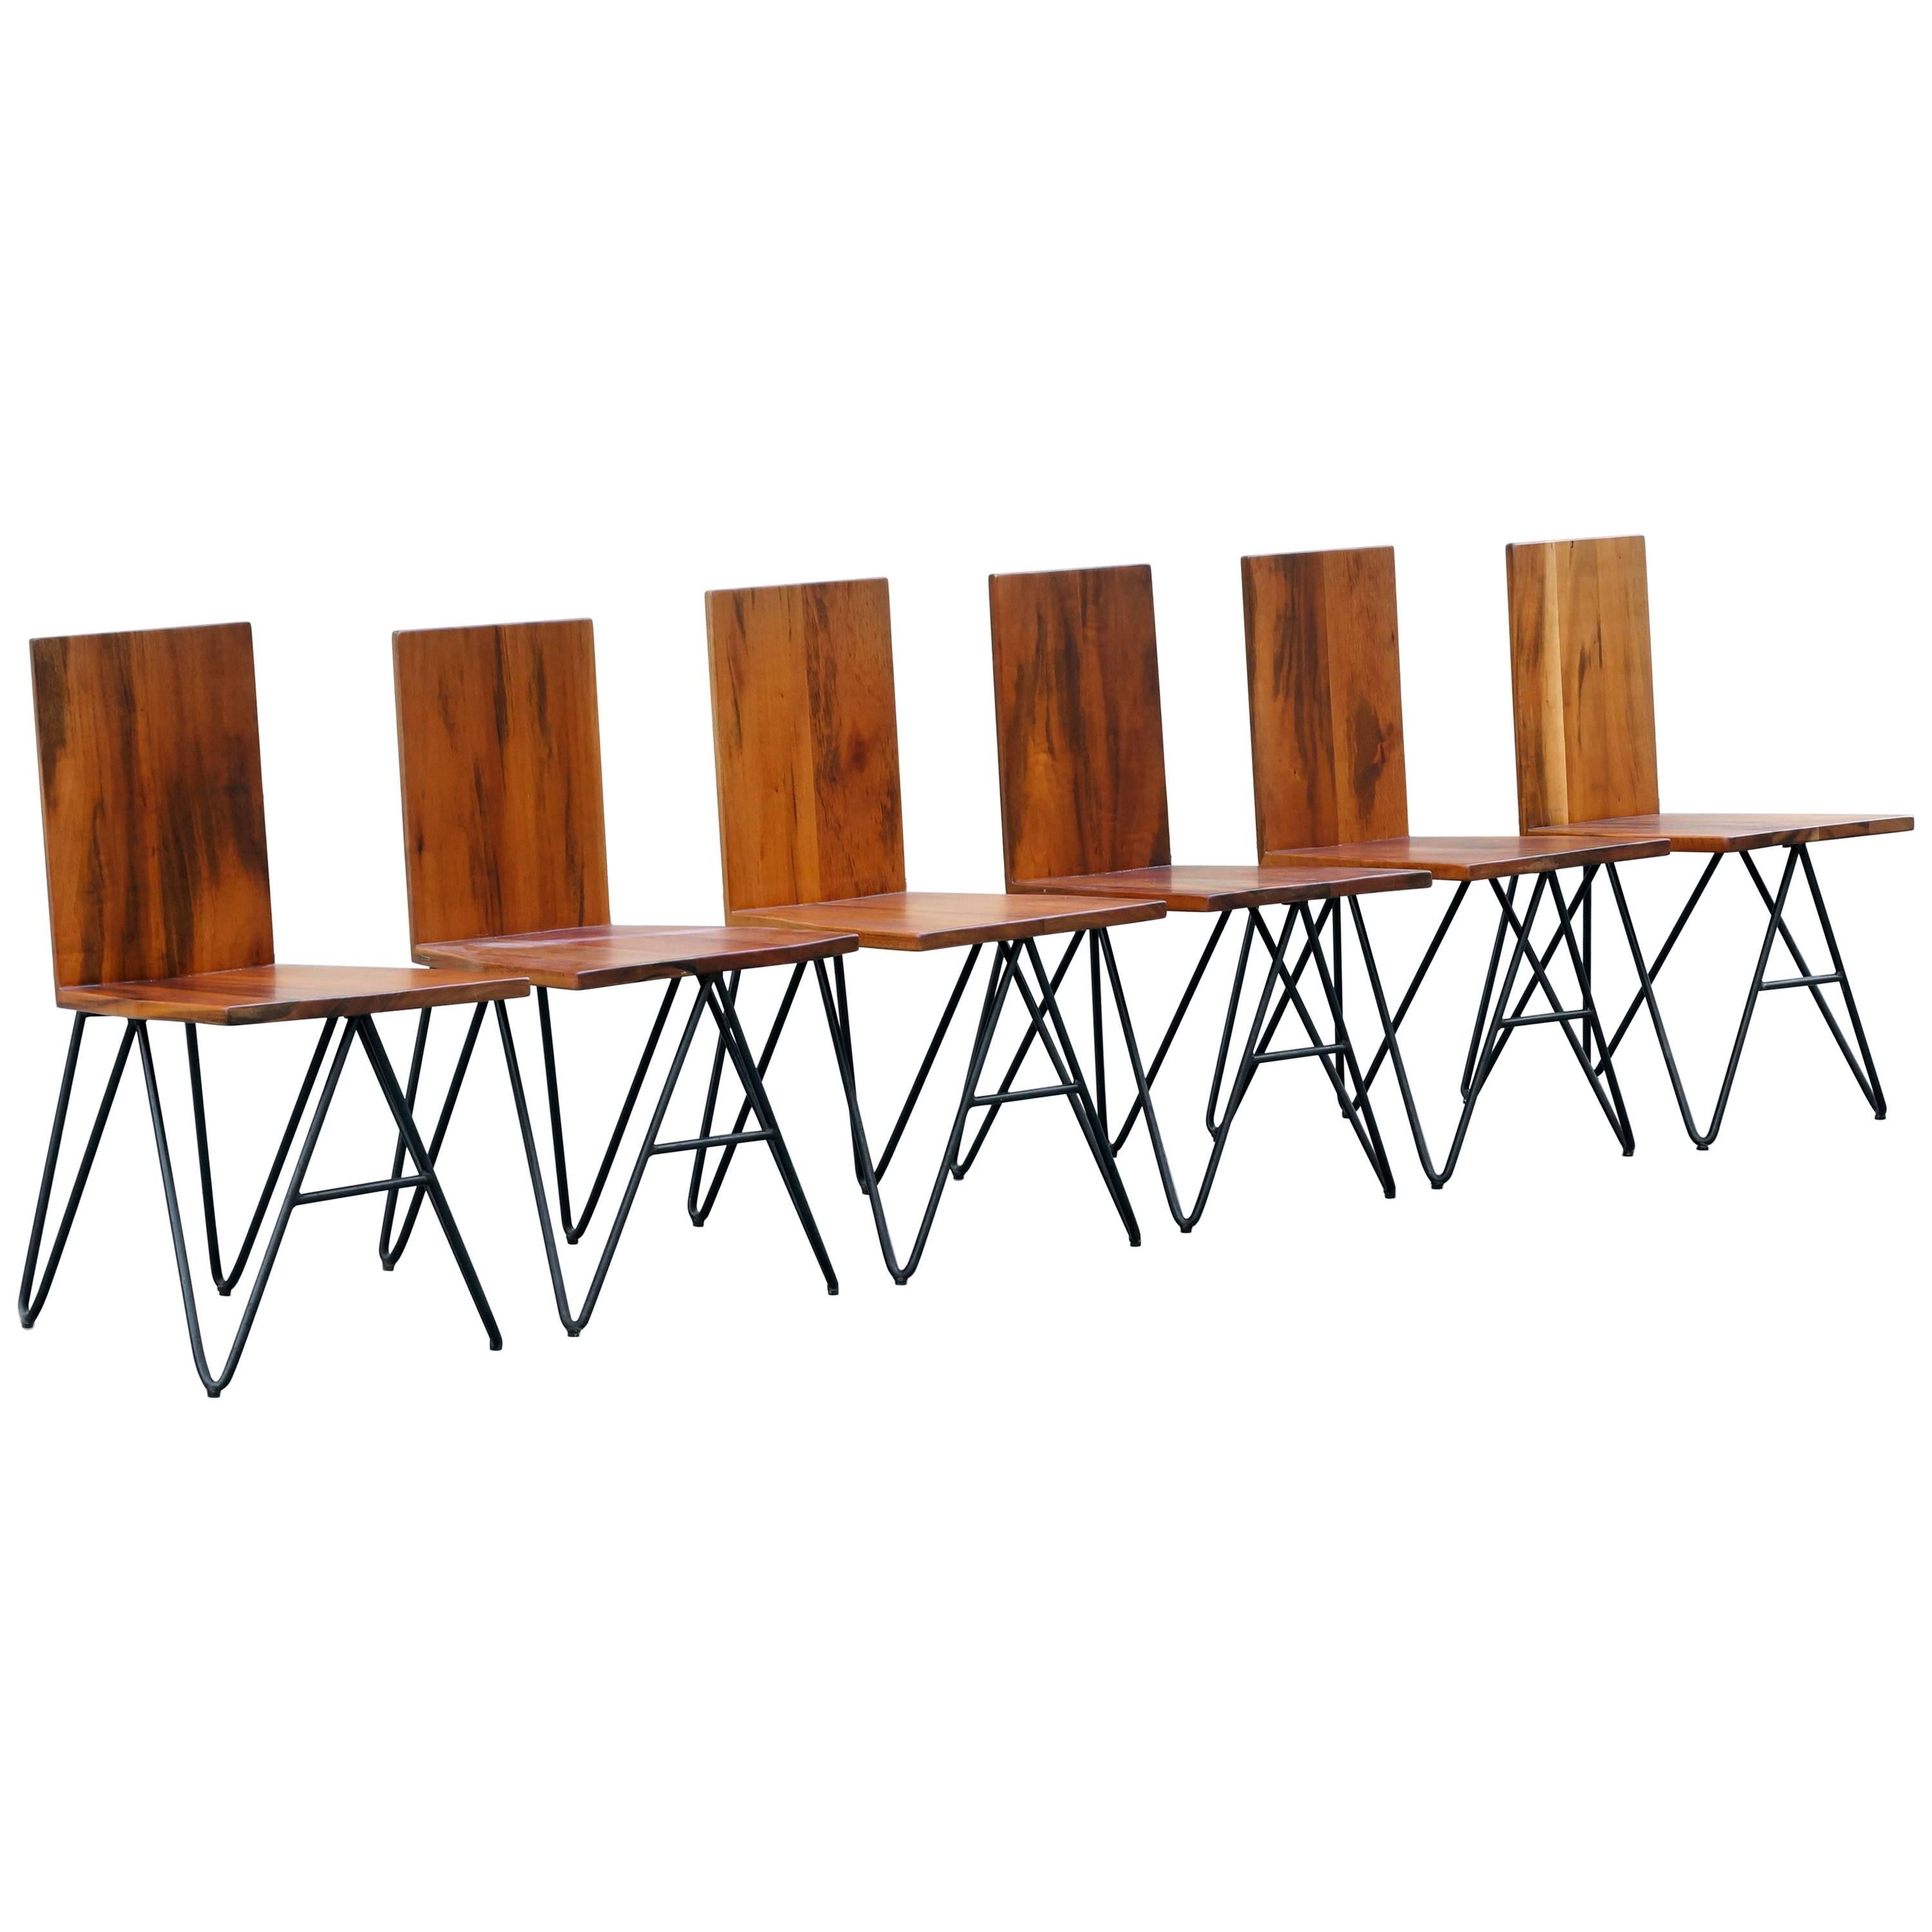 Set of Six Tiger Wood and Steel Modern Dining Chairs by Rehab Vintage Interiors For Sale